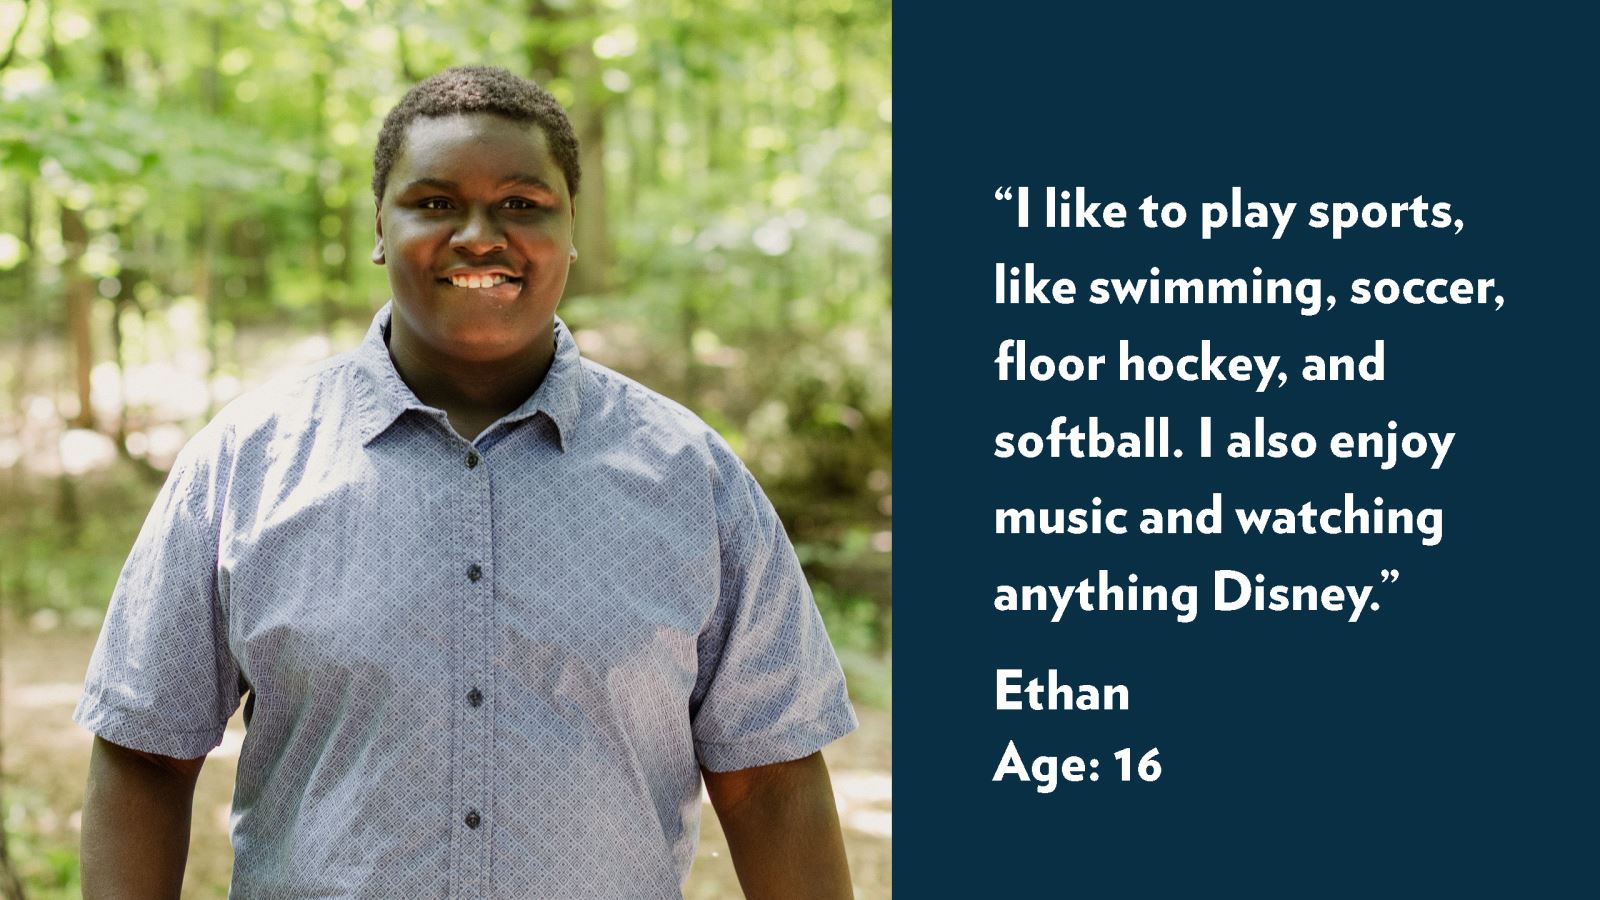 I like to play sports, like swimming, soccer, floor hockey, and softball. I also enjoy music and watching anything Disney. Ethan, age 16. View profile.